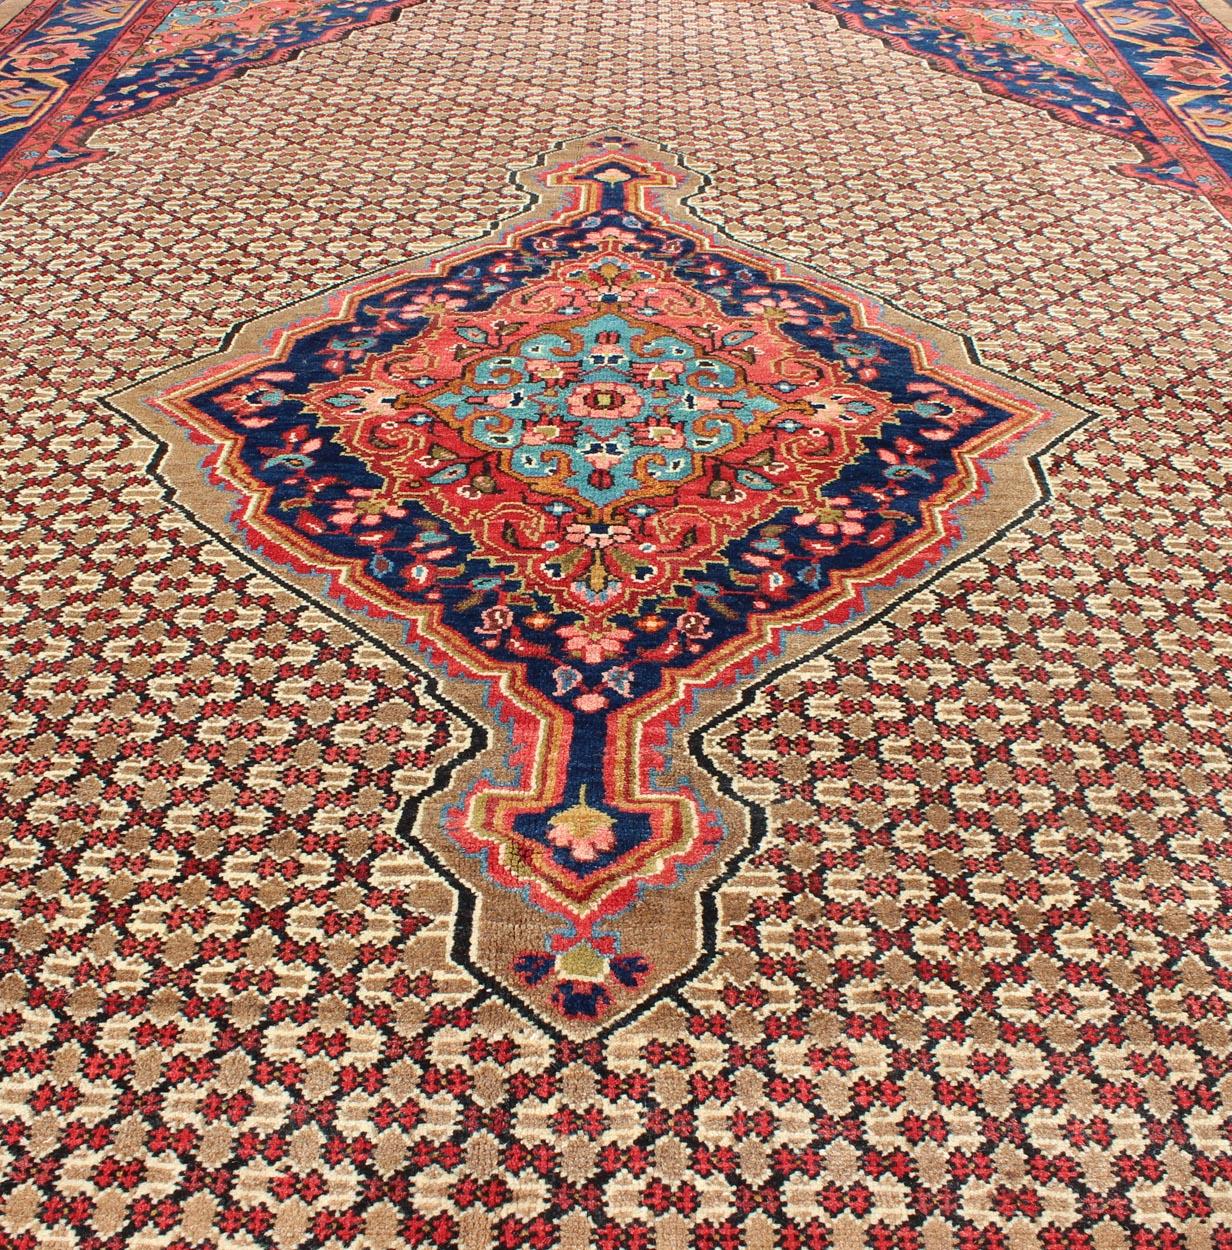 Vintage Persian Hamedan Rug with Layered Floral Medallion in Red, Blue, Cream 4